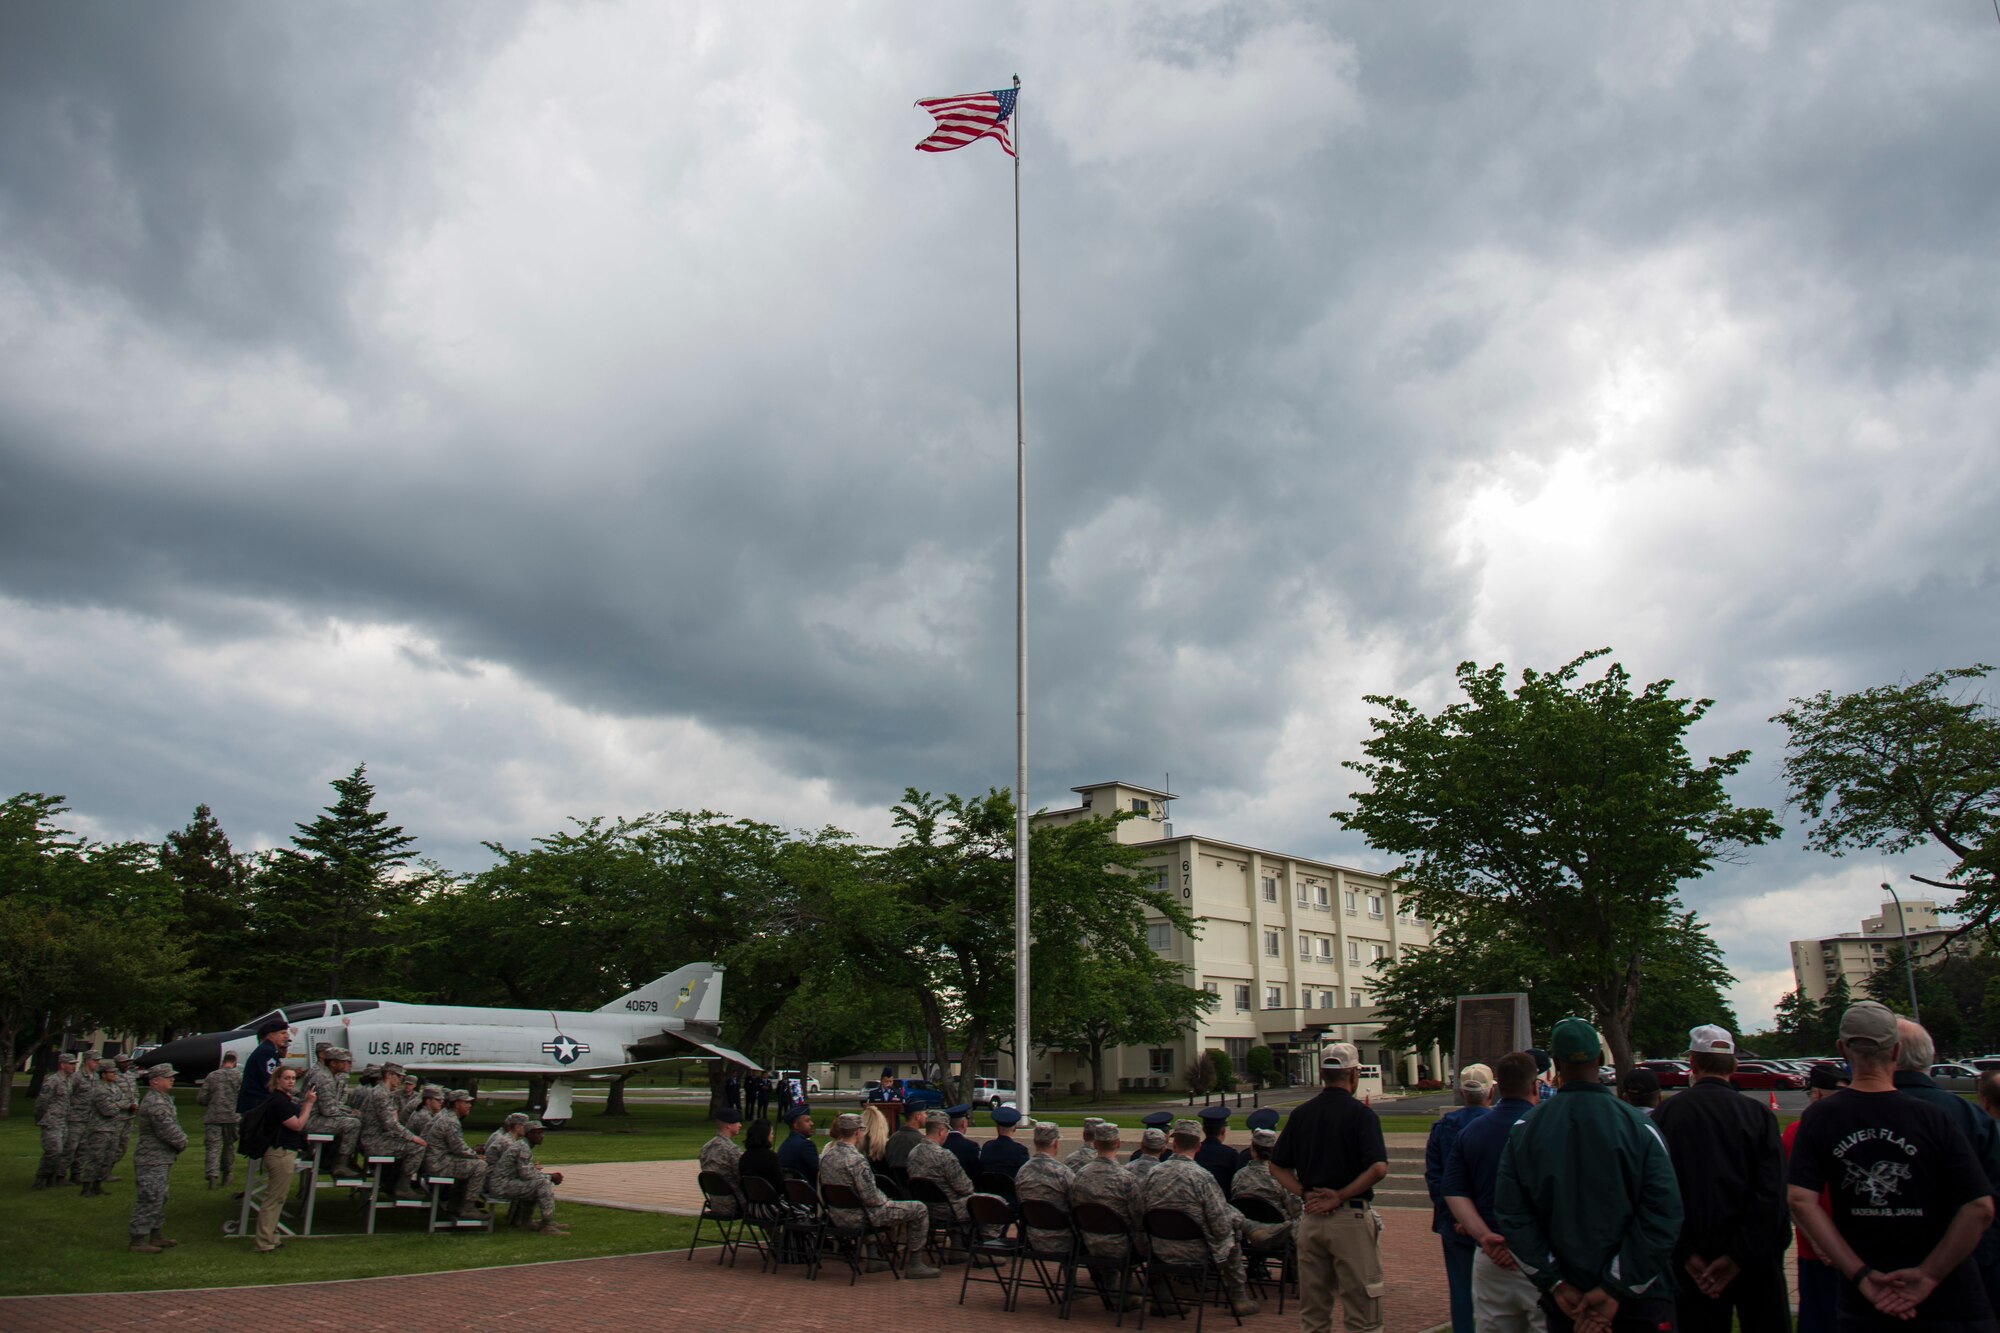 Team Misawa members participate in the Memorial Day ceremony at Misawa Air Base, Japan, May 25, 2018. Memorial Day is said to have originated after the American Civil War and observed on the last Monday of May in remembrance of those who gave the ultimate sacrifice.
(U.S. Air Force photo by Airman 1st Class Collette Brooks)